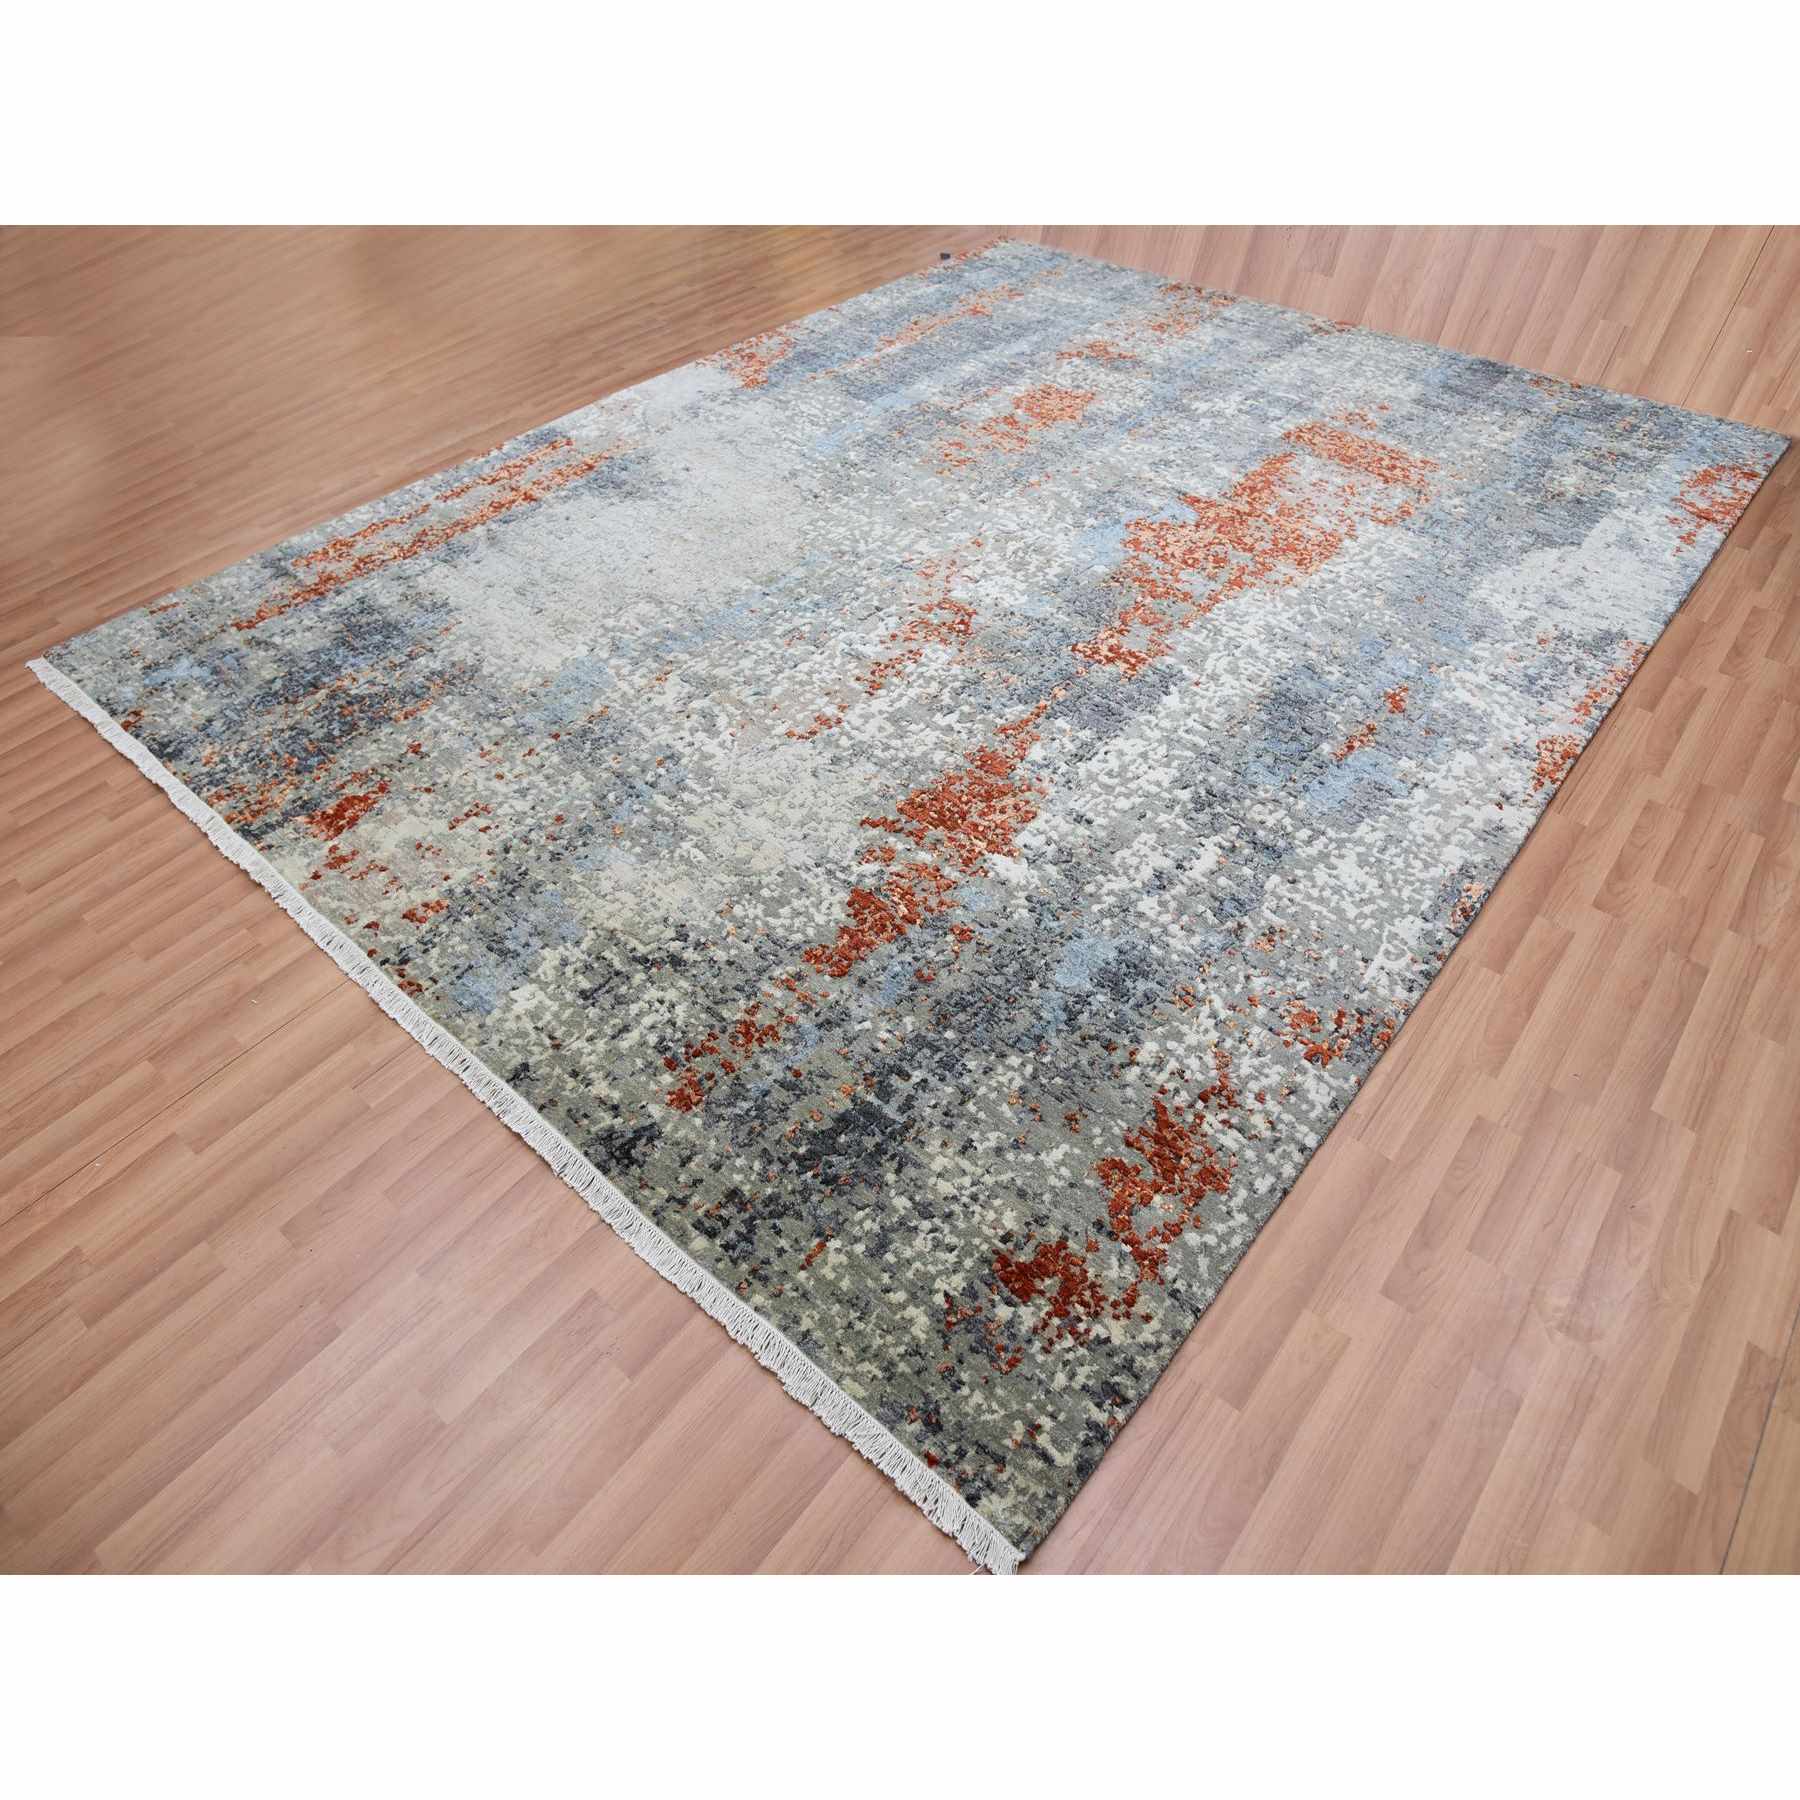 Modern-and-Contemporary-Hand-Knotted-Rug-415580